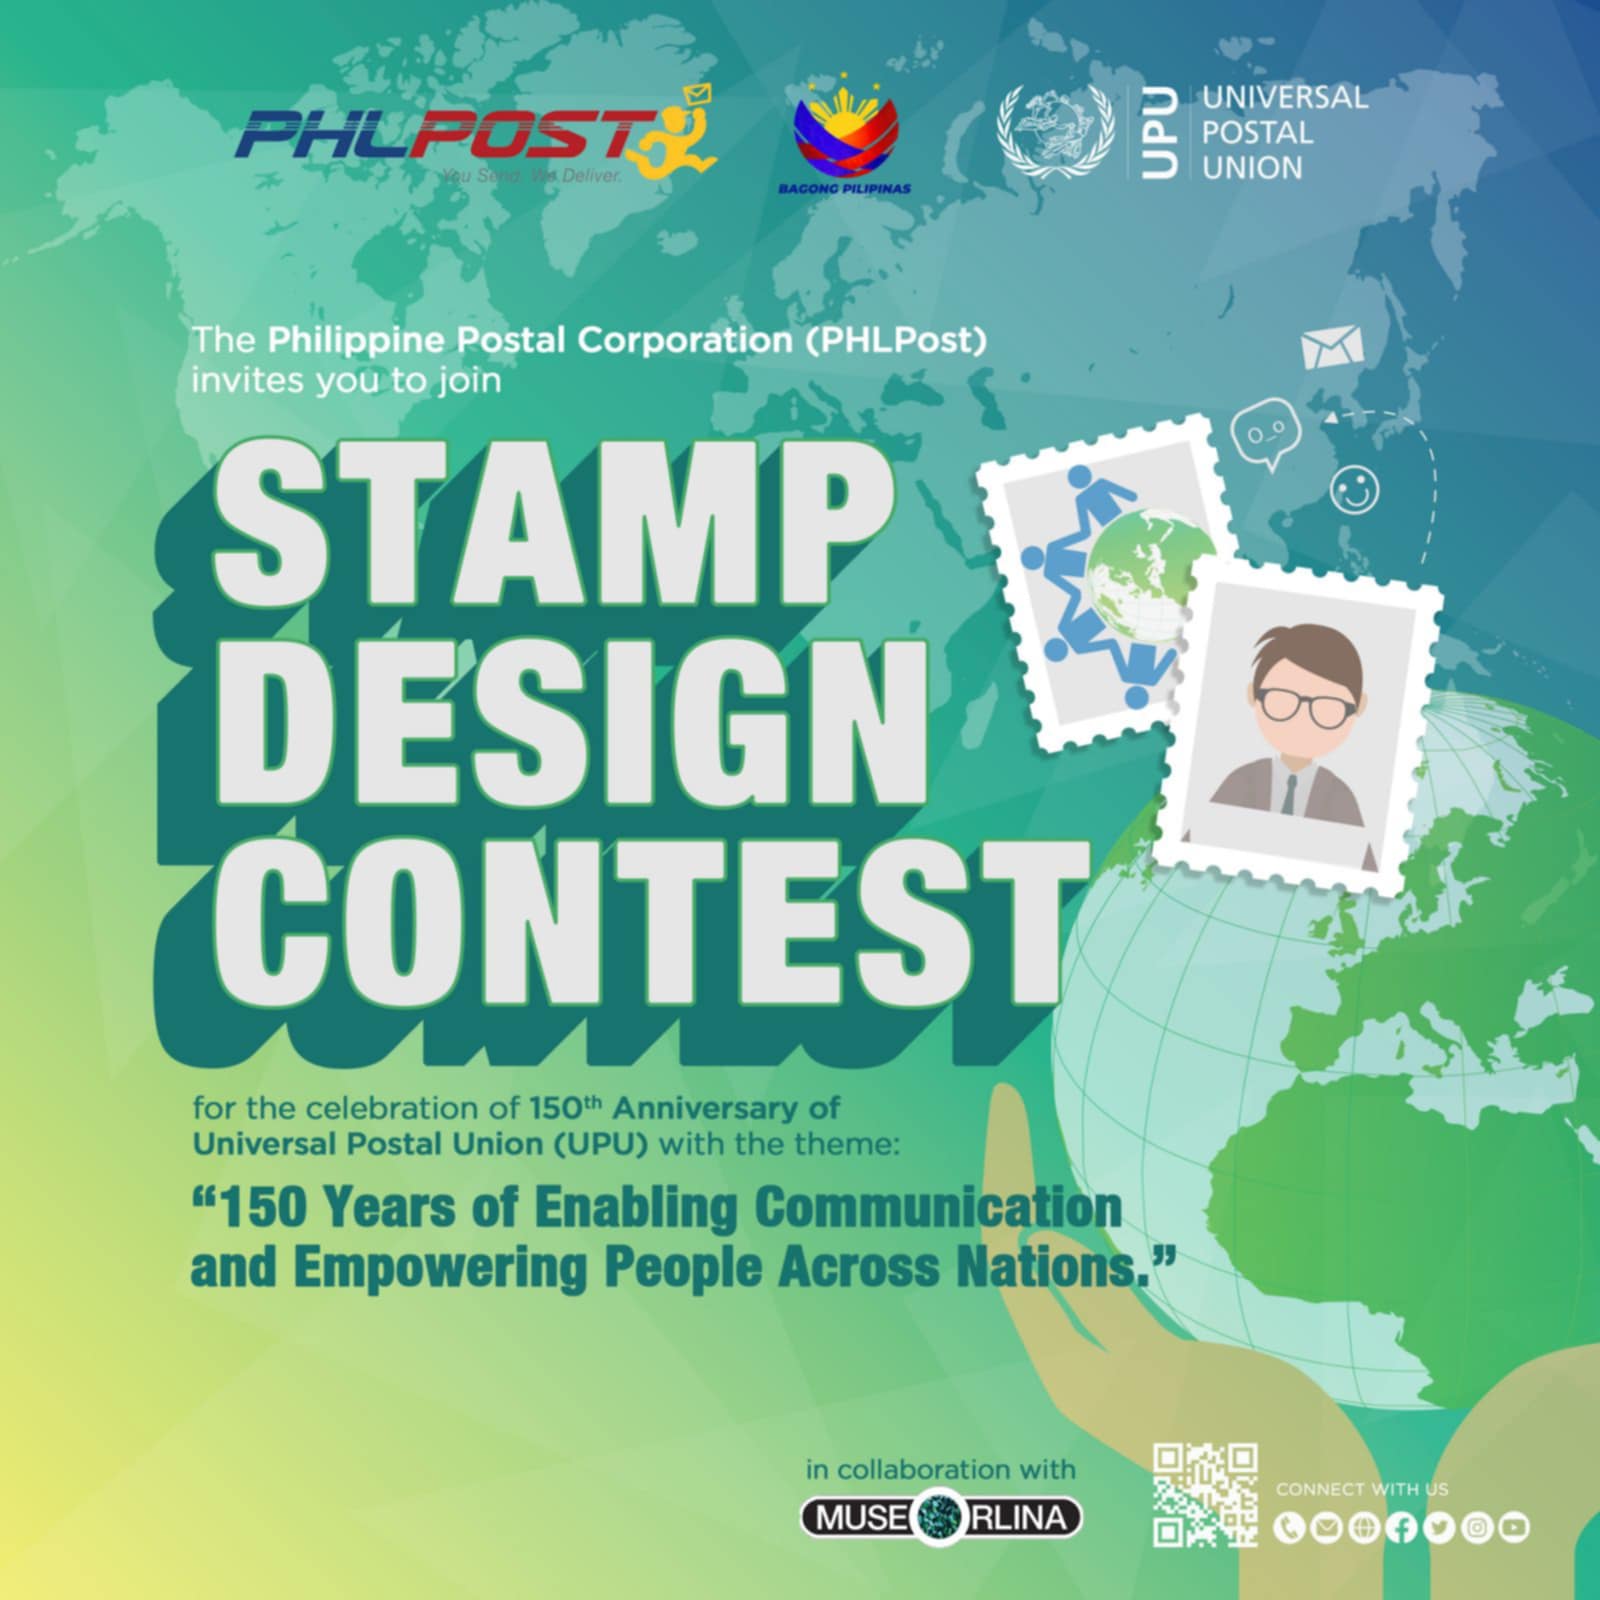 The Post Office and Museo Orlina partners for UPU 150th Anniversary stamp design contest